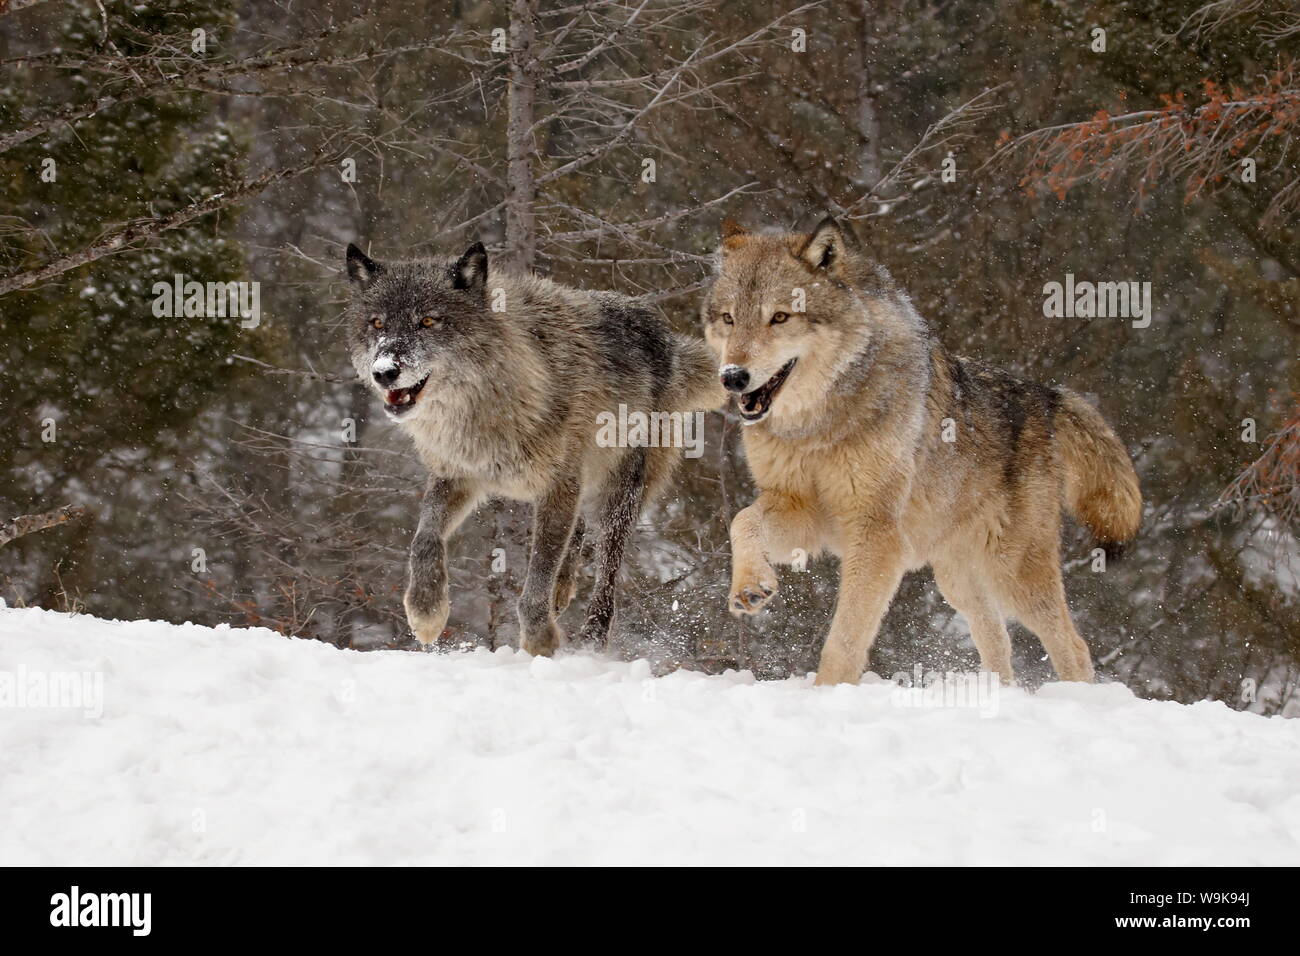 Two captive gray wolves (Canis lupus) running in the snow, near Bozeman, Montana, United States of America, North America Stock Photo